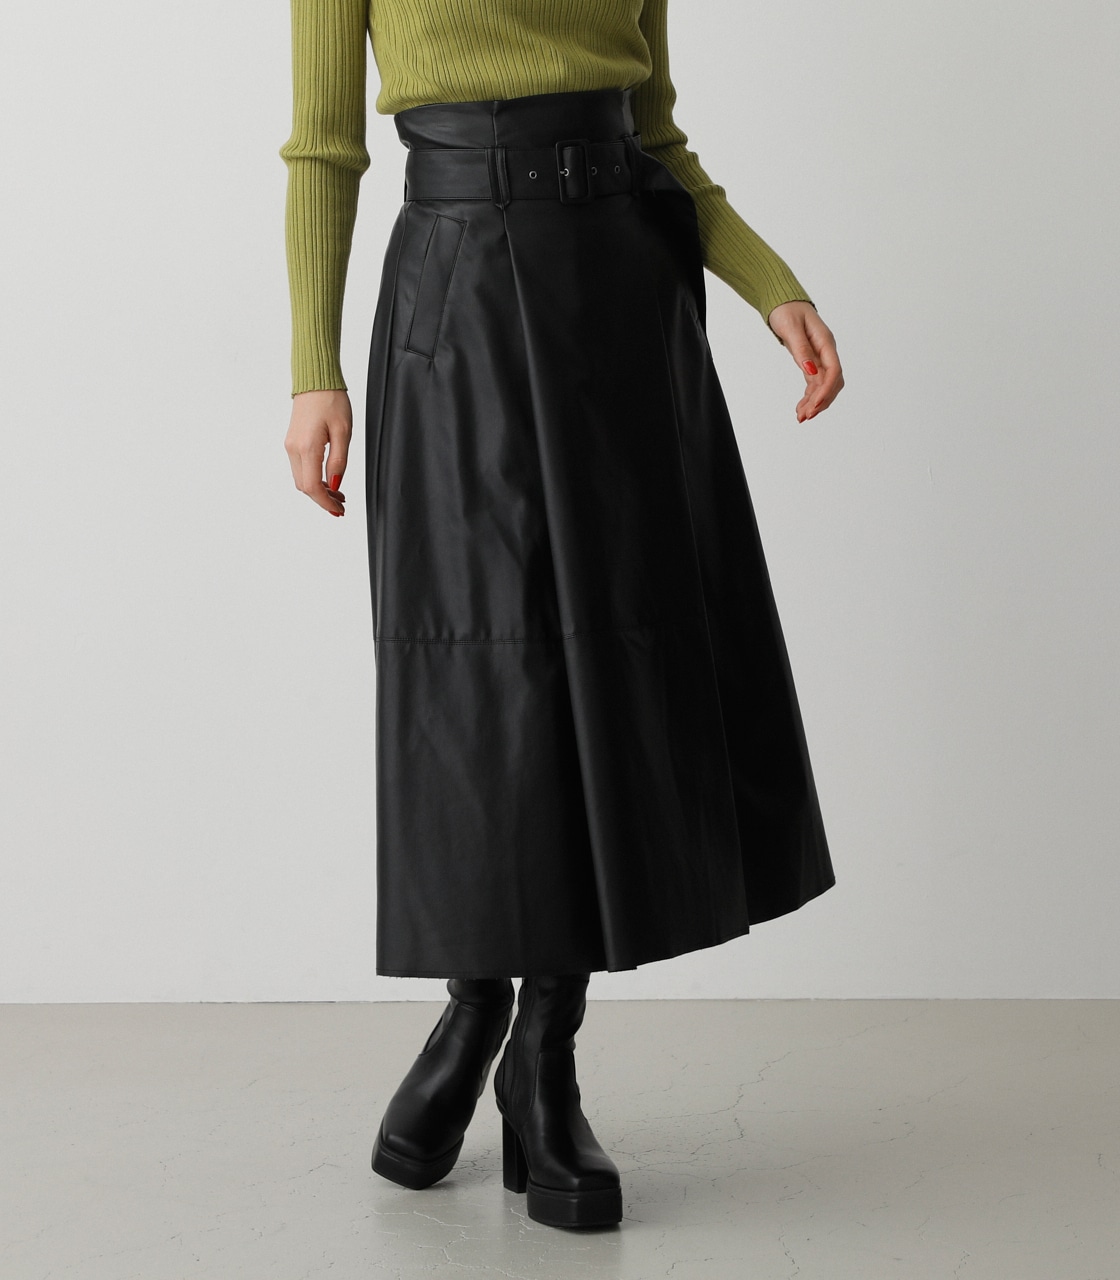 FAUX LEATHER HIGH WAIST SKIRT/フェイクレザーハイウエストスカート